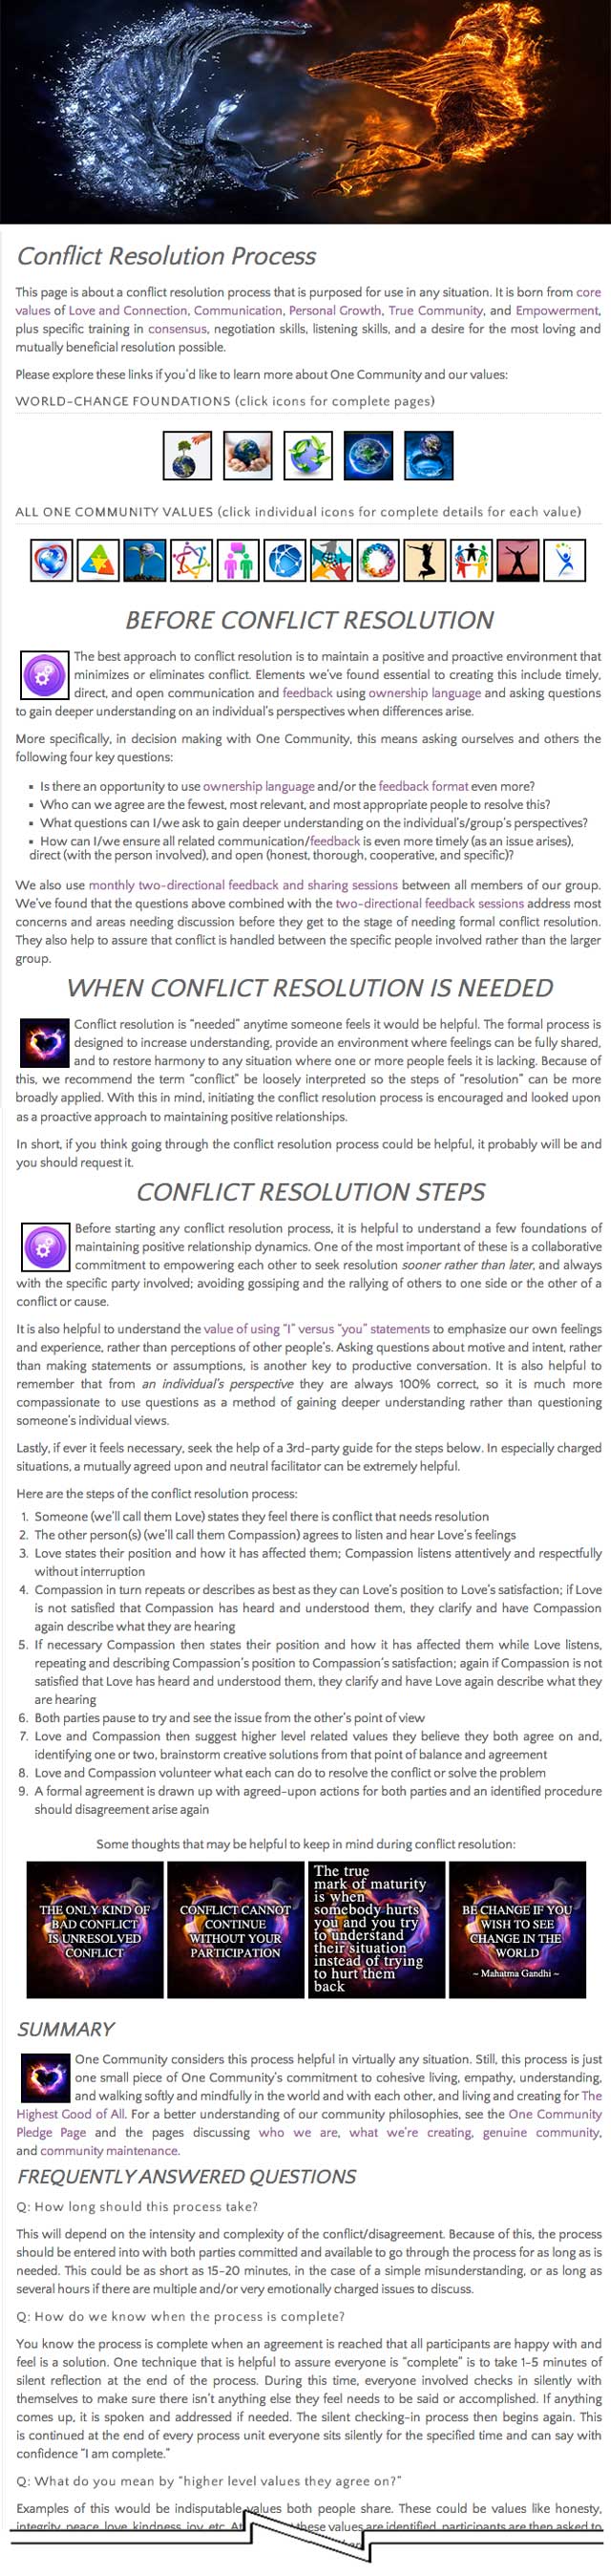 Conflict Resolution Process, One Community